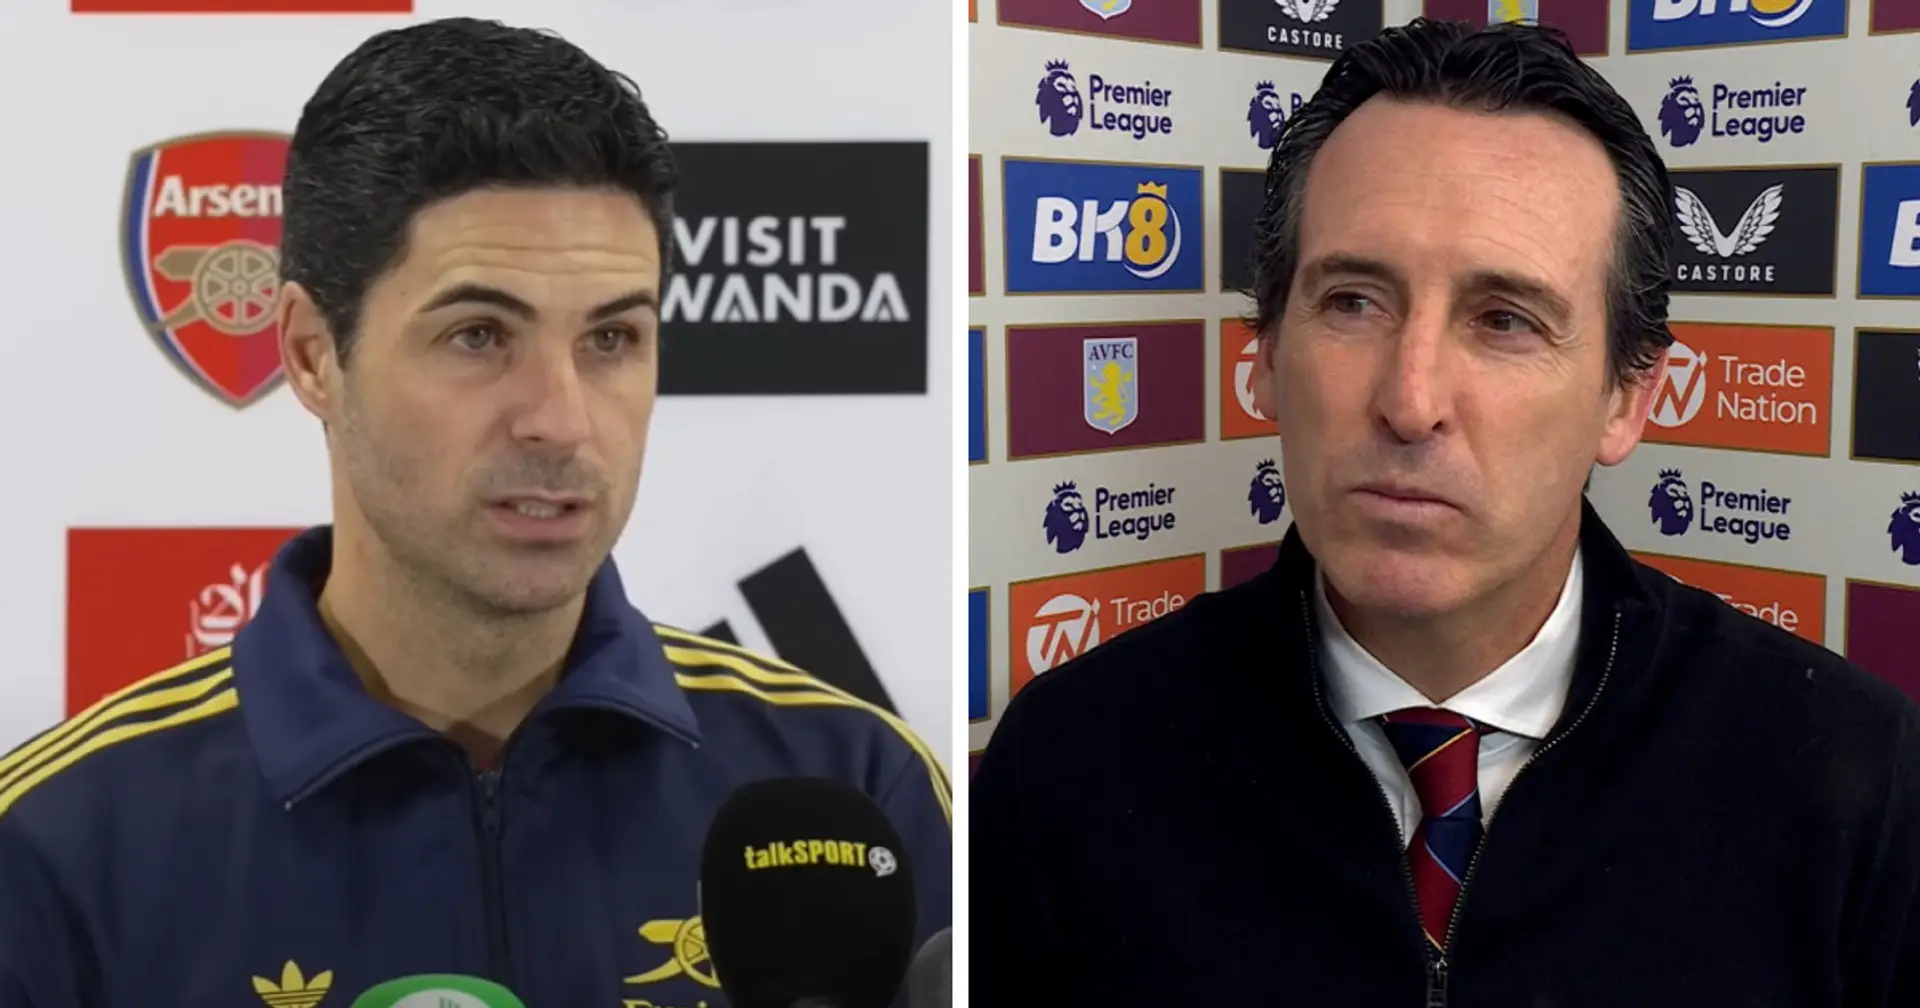 'Players between the lines': Mikel Arteta explains why Aston Villa play so well tactically